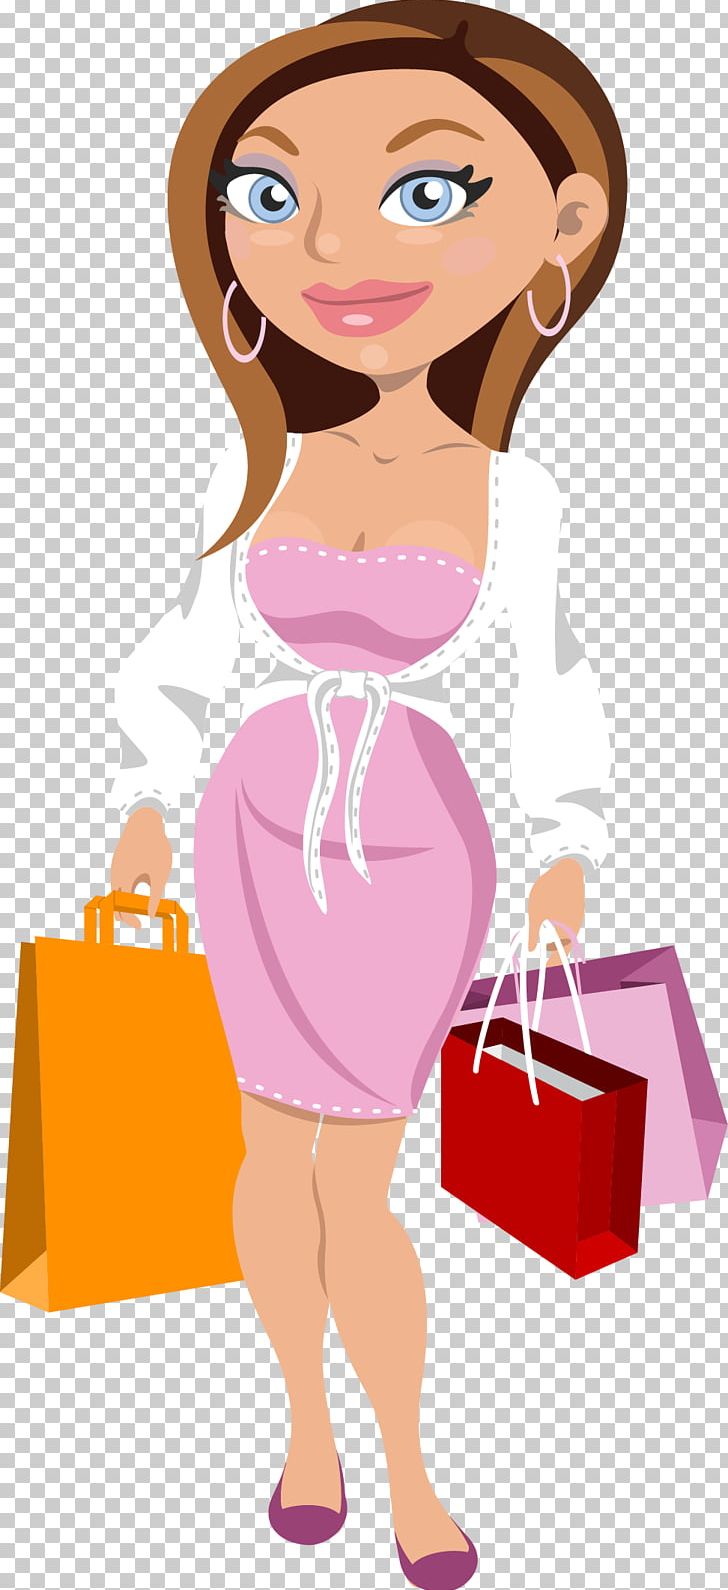 Woman Illustration PNG, Clipart, Arm, Business Woman, Cartoon, Child, Conversation Free PNG Download